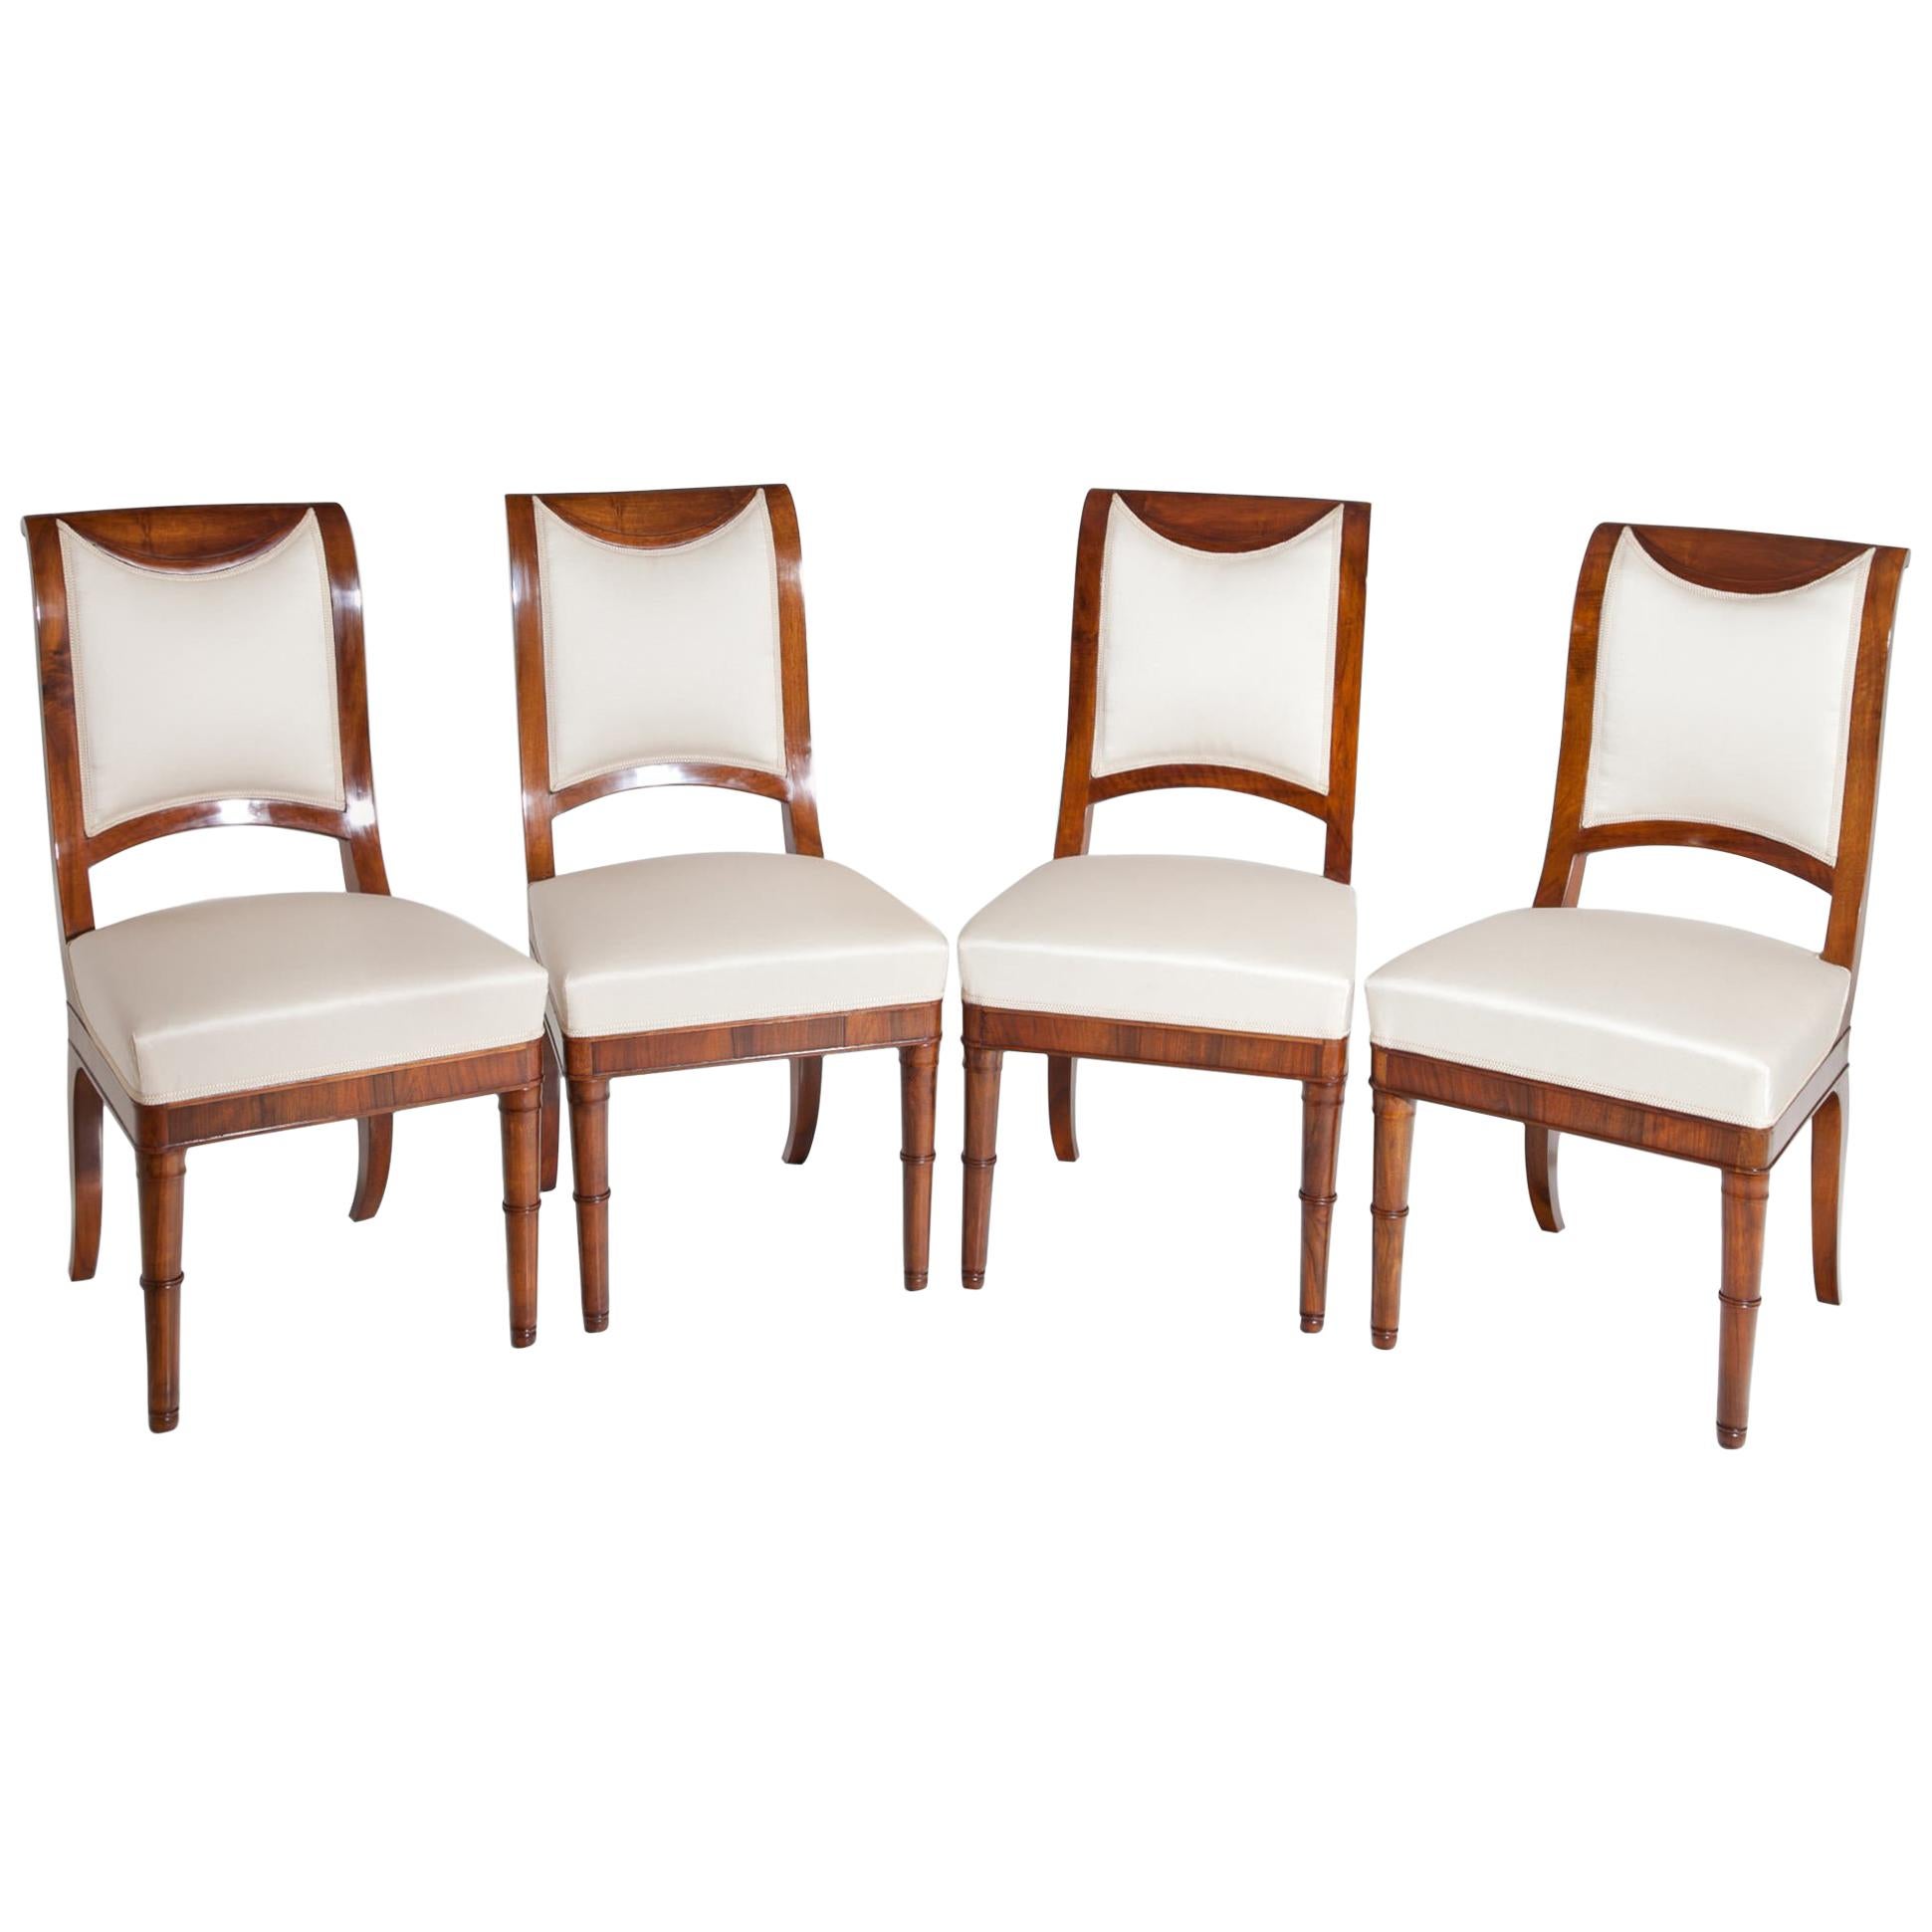 Directoire Chairs, France, 19th Century